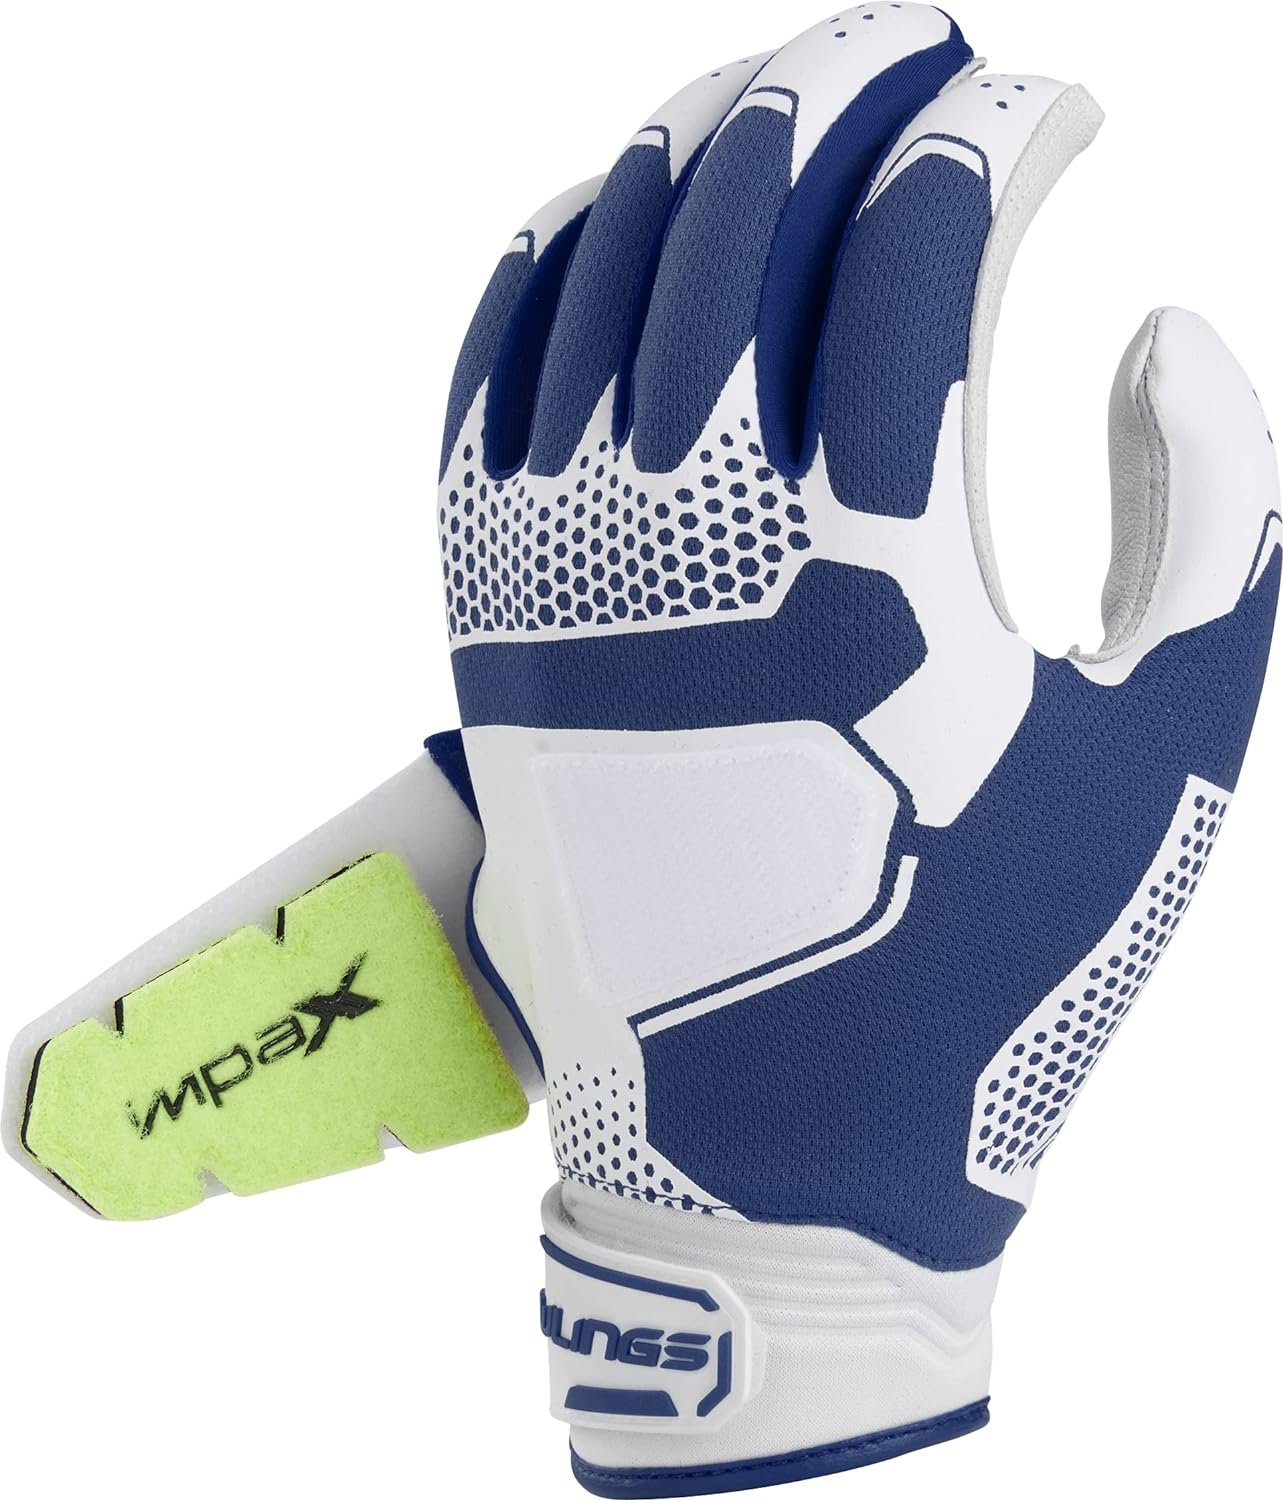 Rawlings | Workhorse PRO Fastpitch Softball Batting Gloves | Double Strap | Impax Pad | Adult | Multiple Colors